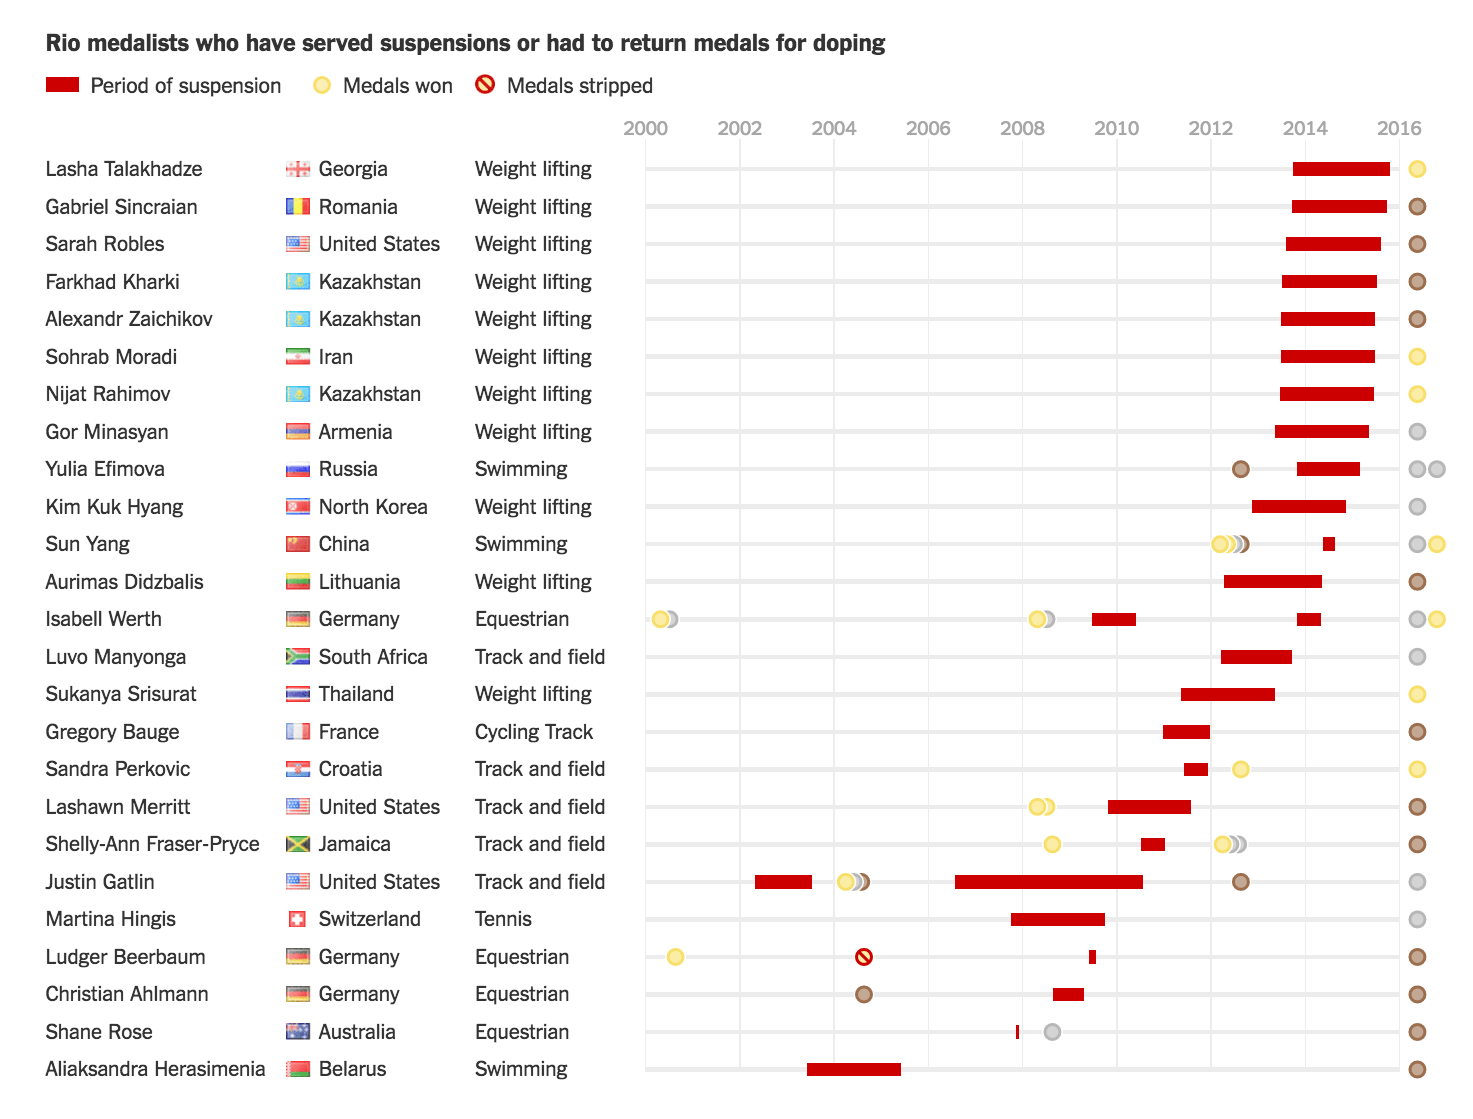 The Athletes at the Rio Olympics That Have Previously Been Suspended for Doping